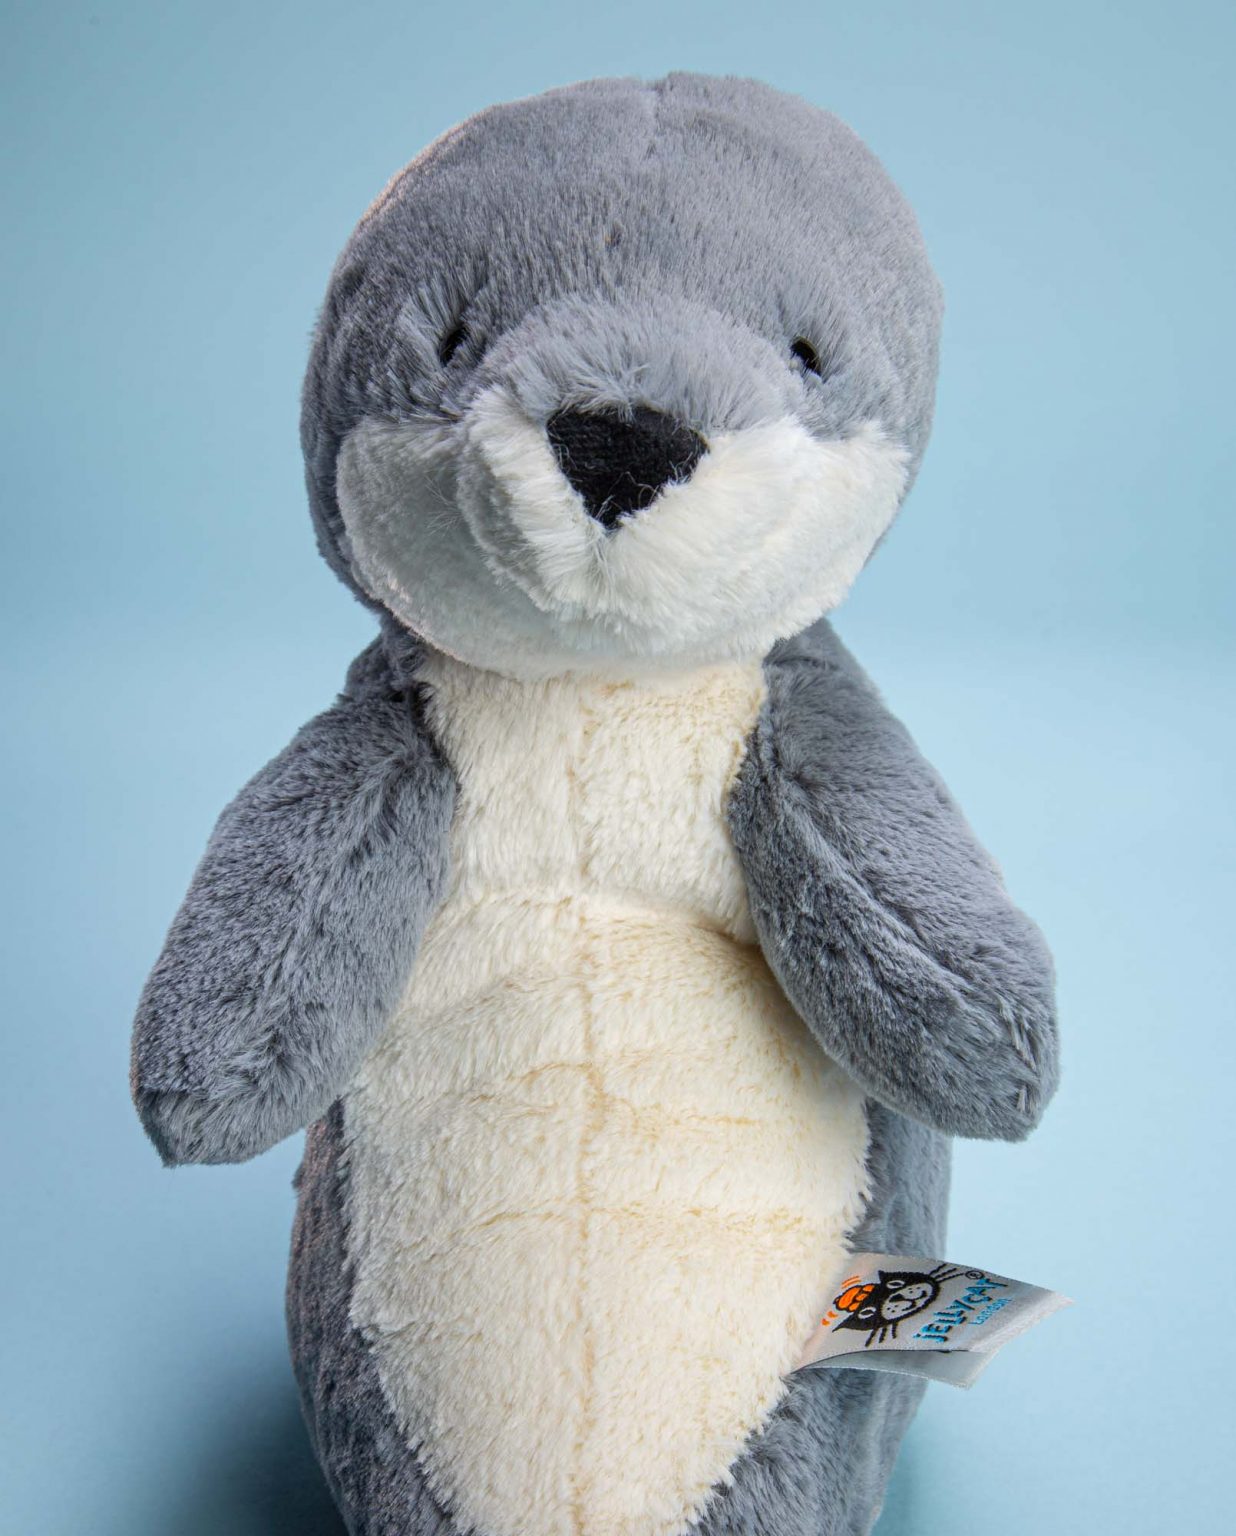 Jellycat Seal soft toy gift - Send a Cuddly